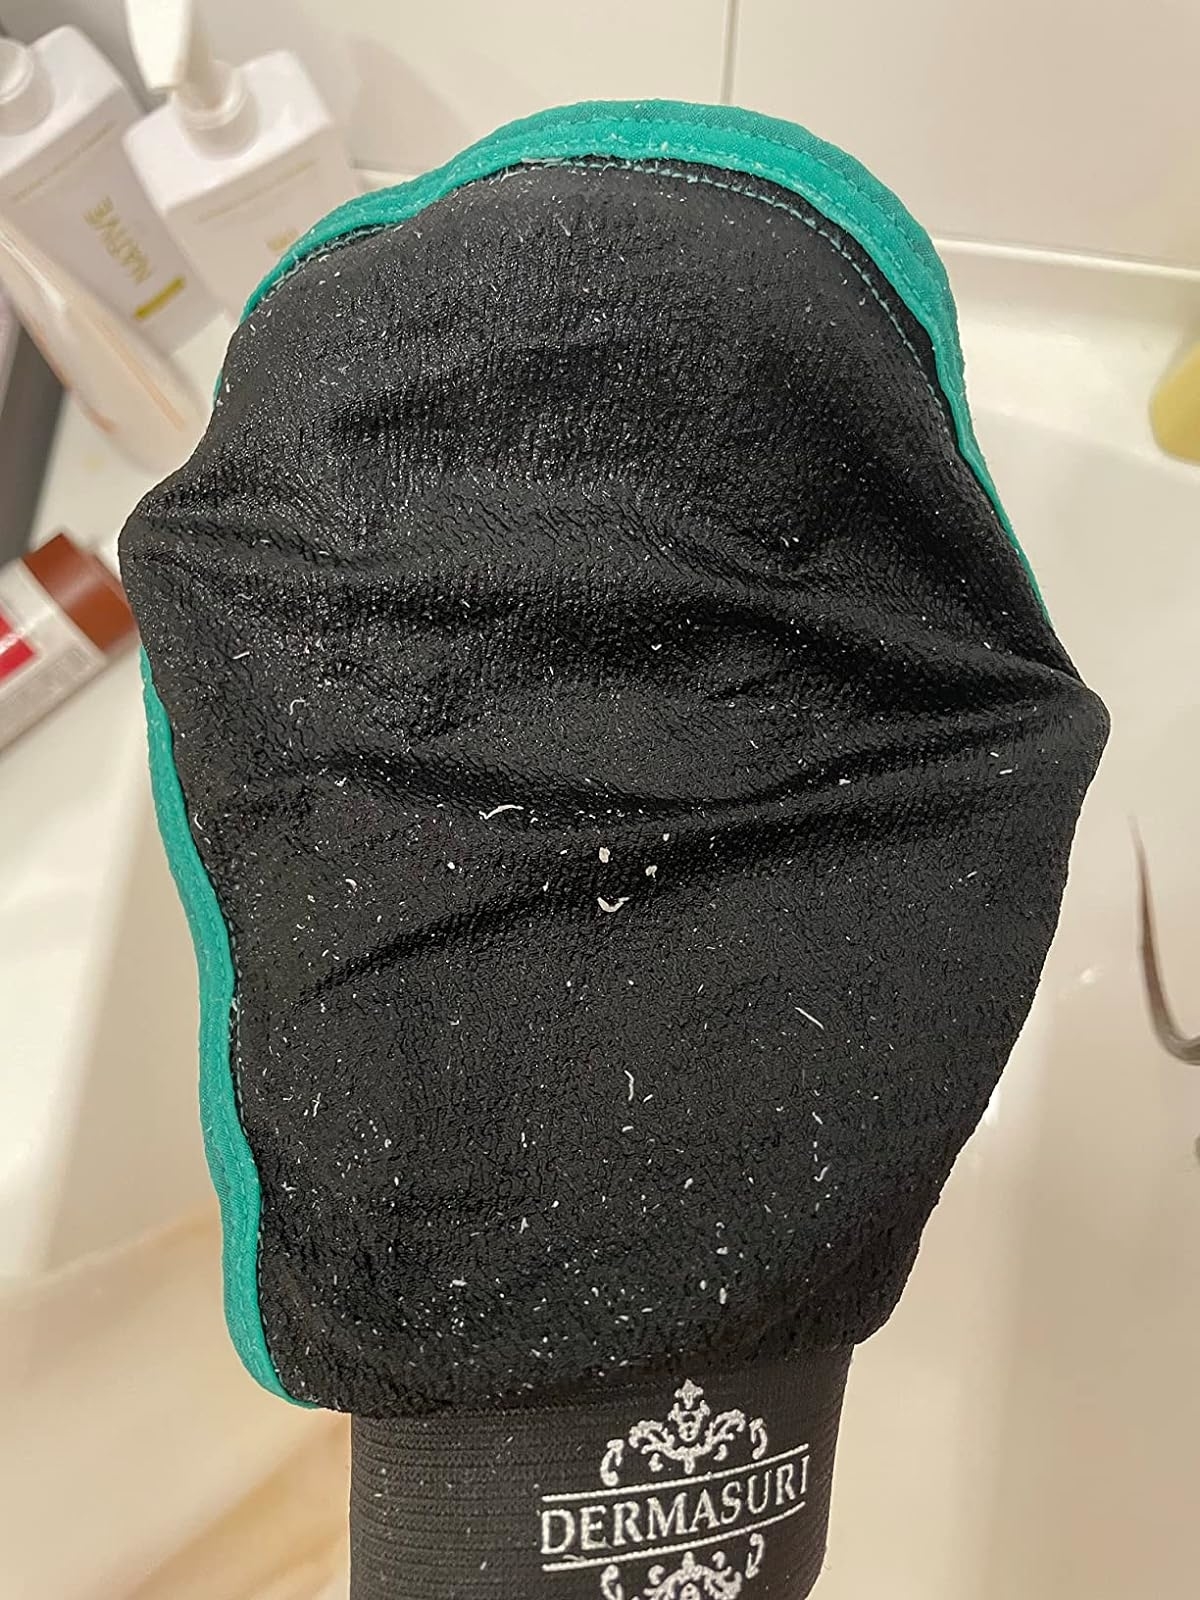 Exfoliating mitt by Dermasuri with visible texture, showing dead skin flakes on it